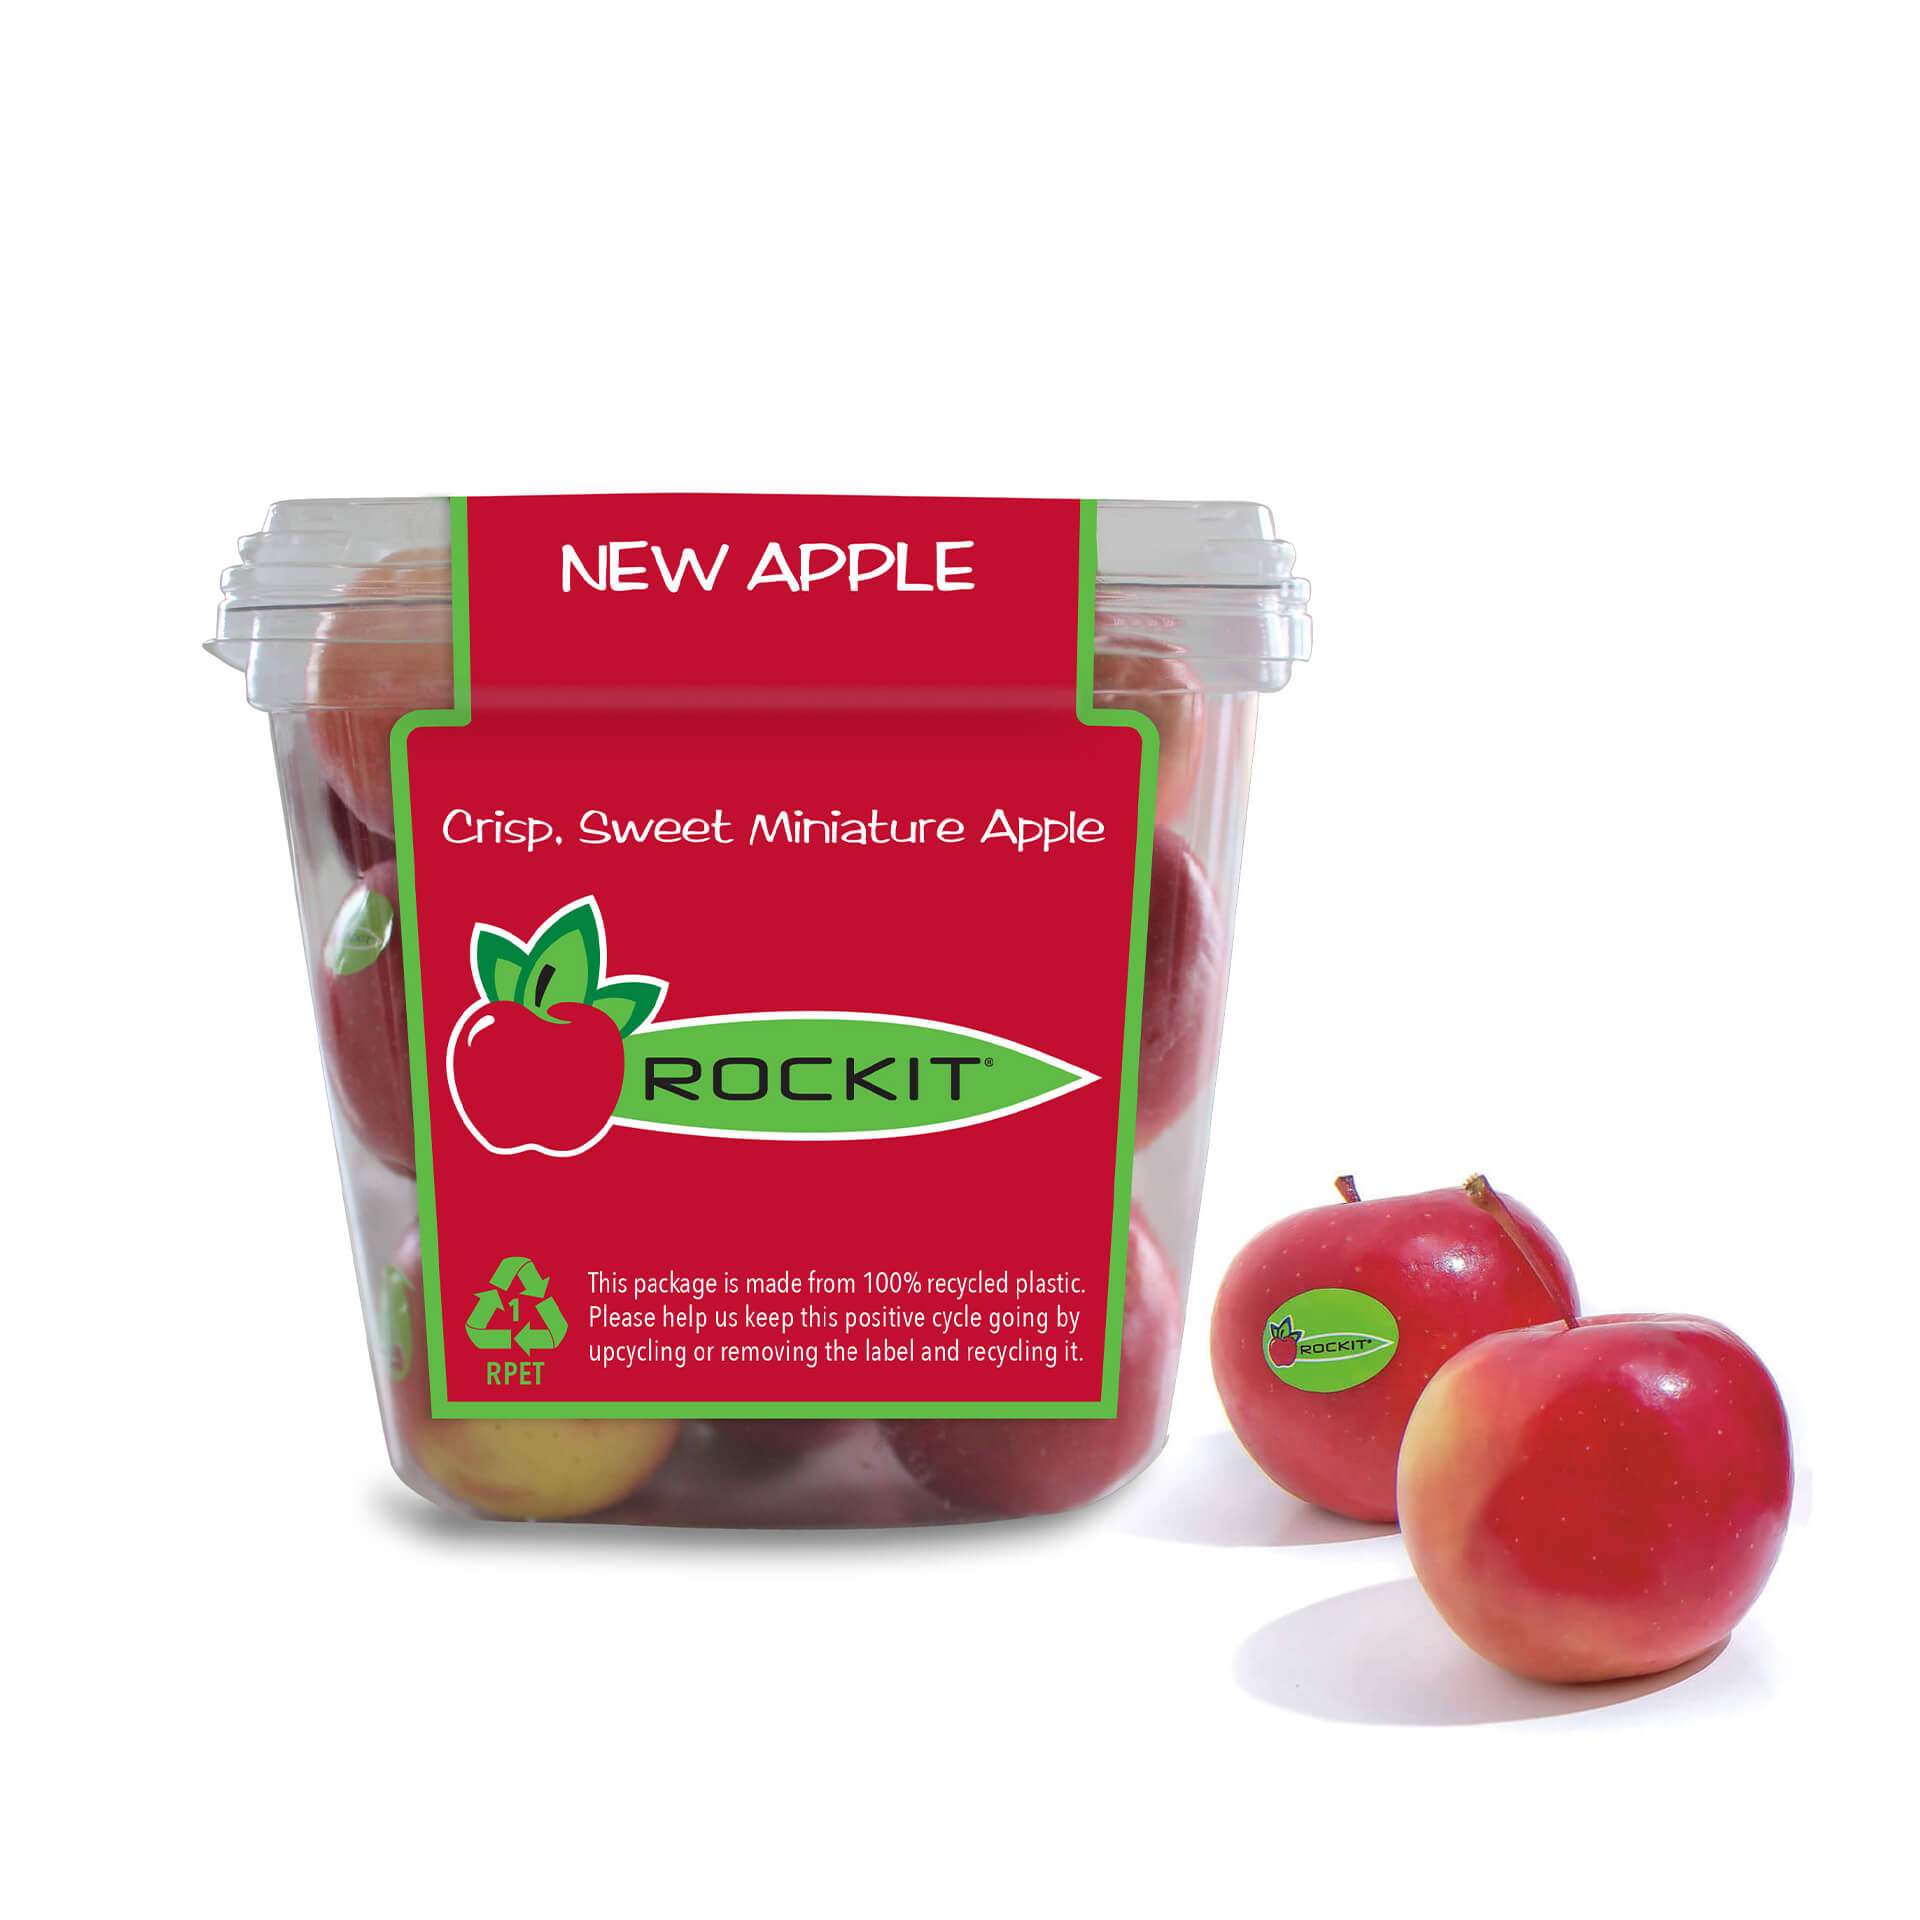 A container of Rockit apples with two loose apples for Rockit Apple nutrition